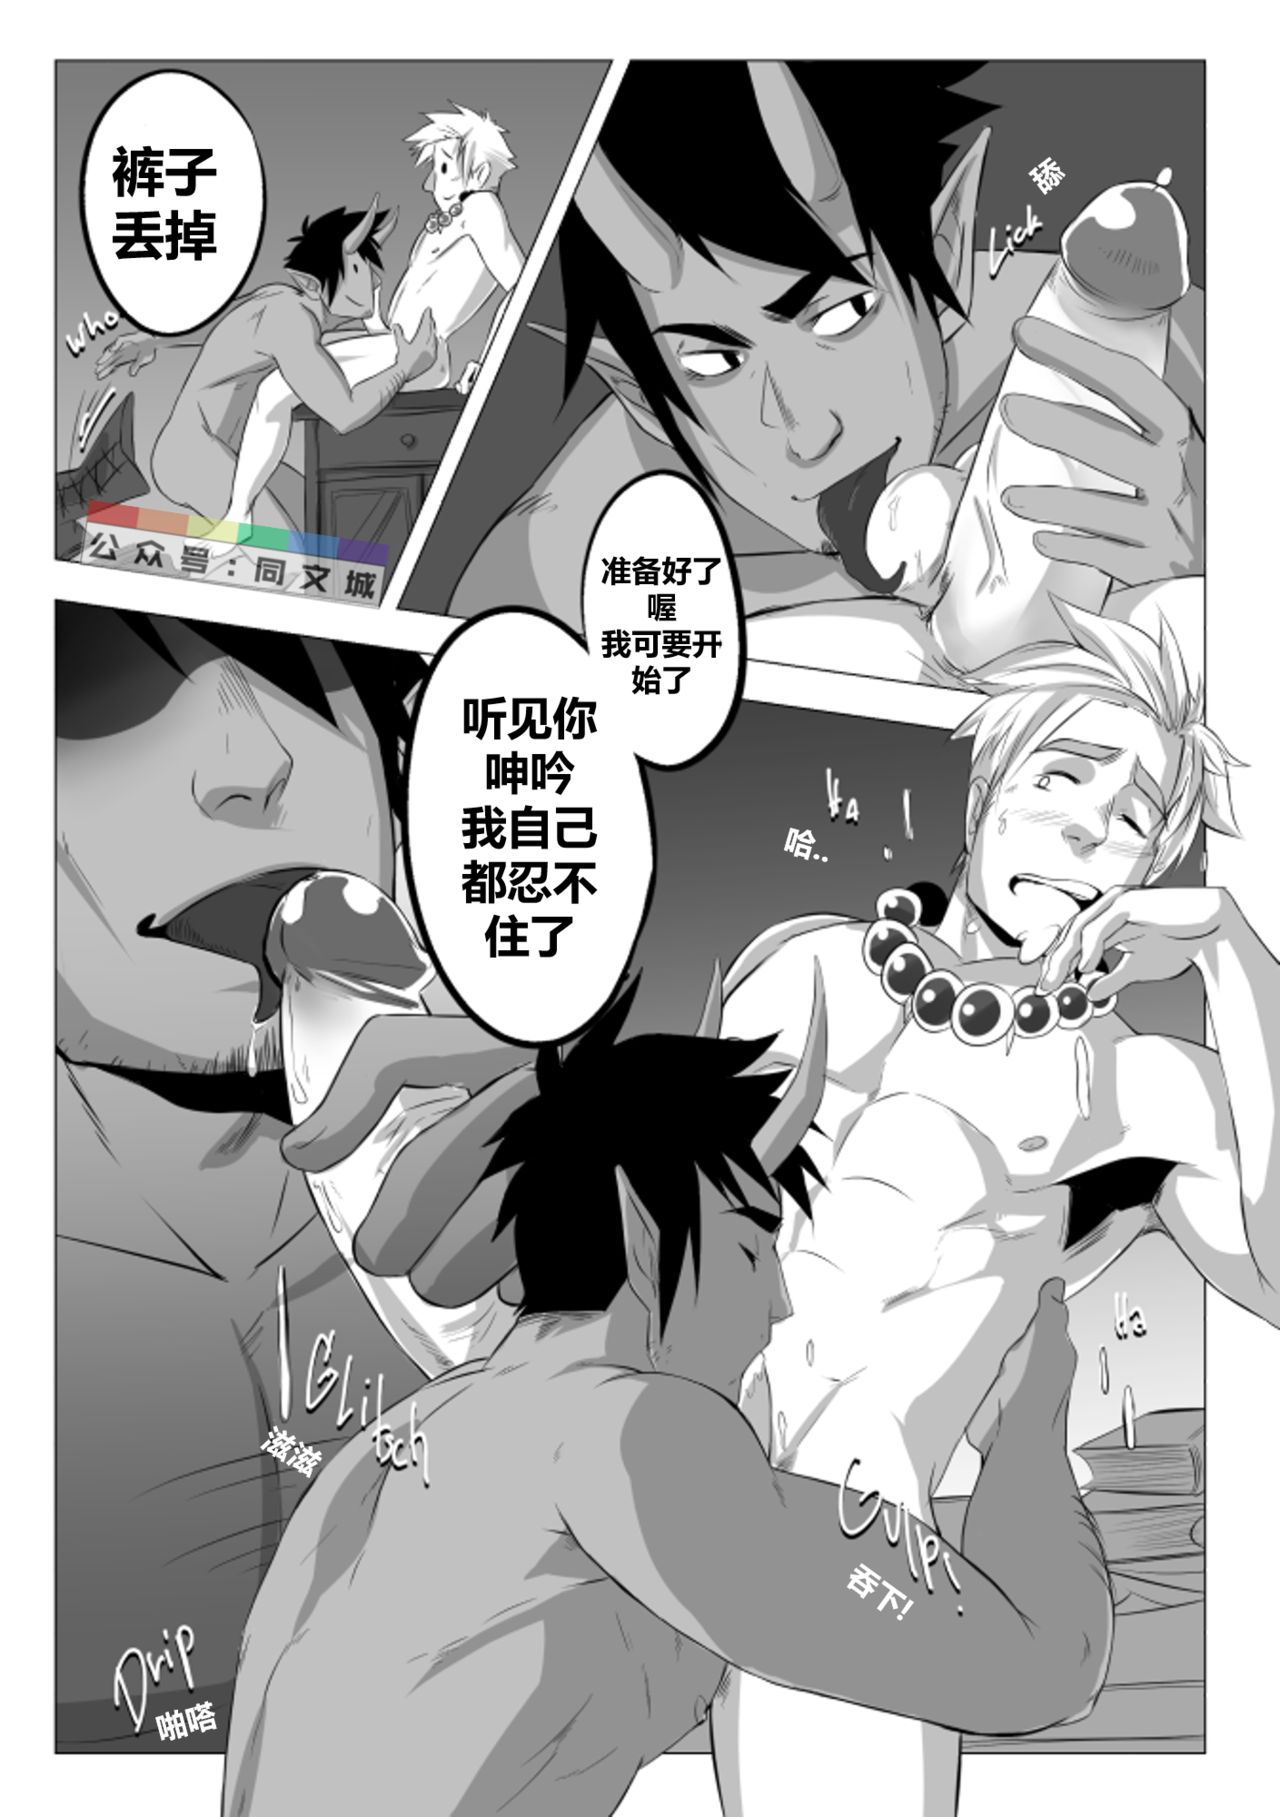 Jasdavi – Keep it Clean!（Chinese） page 9 full